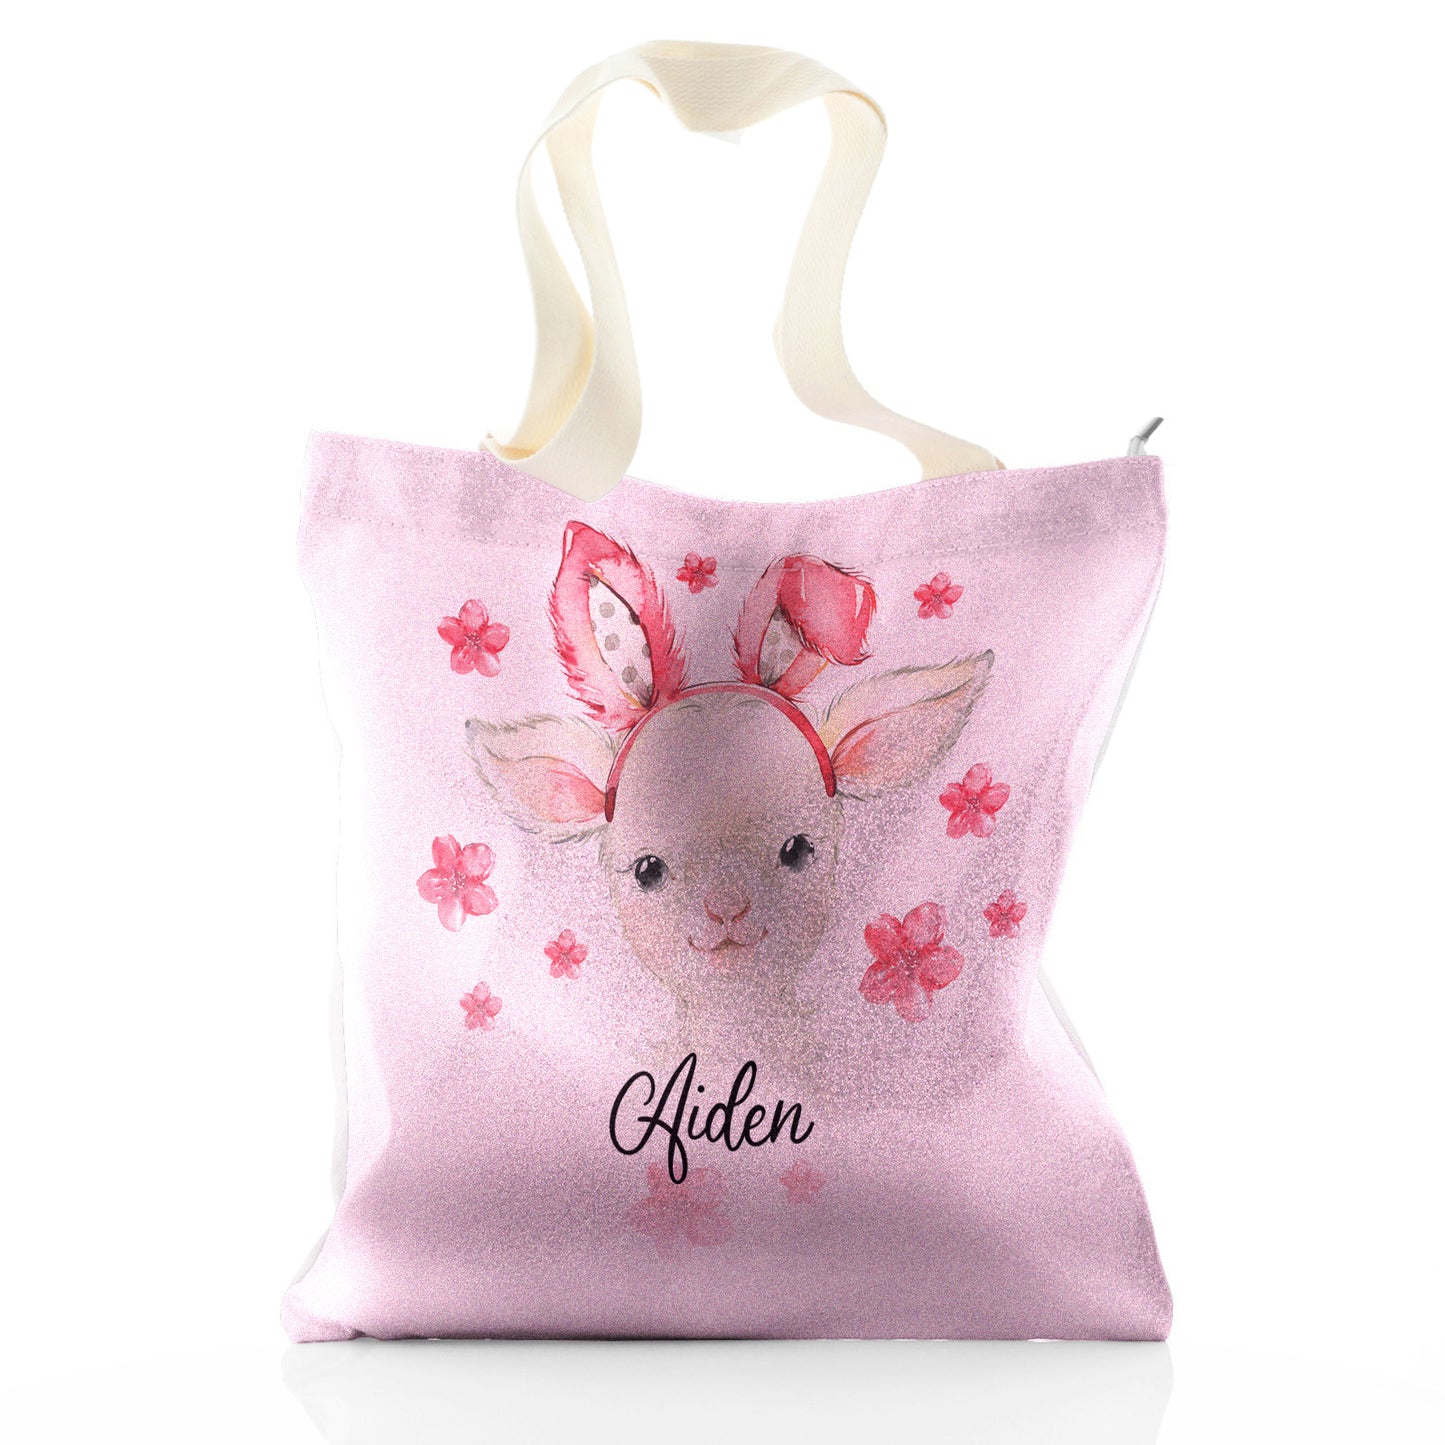 Personalised Glitter Tote Bag with White Lamb Pink Bunny Ears and Flowers and Cute Text